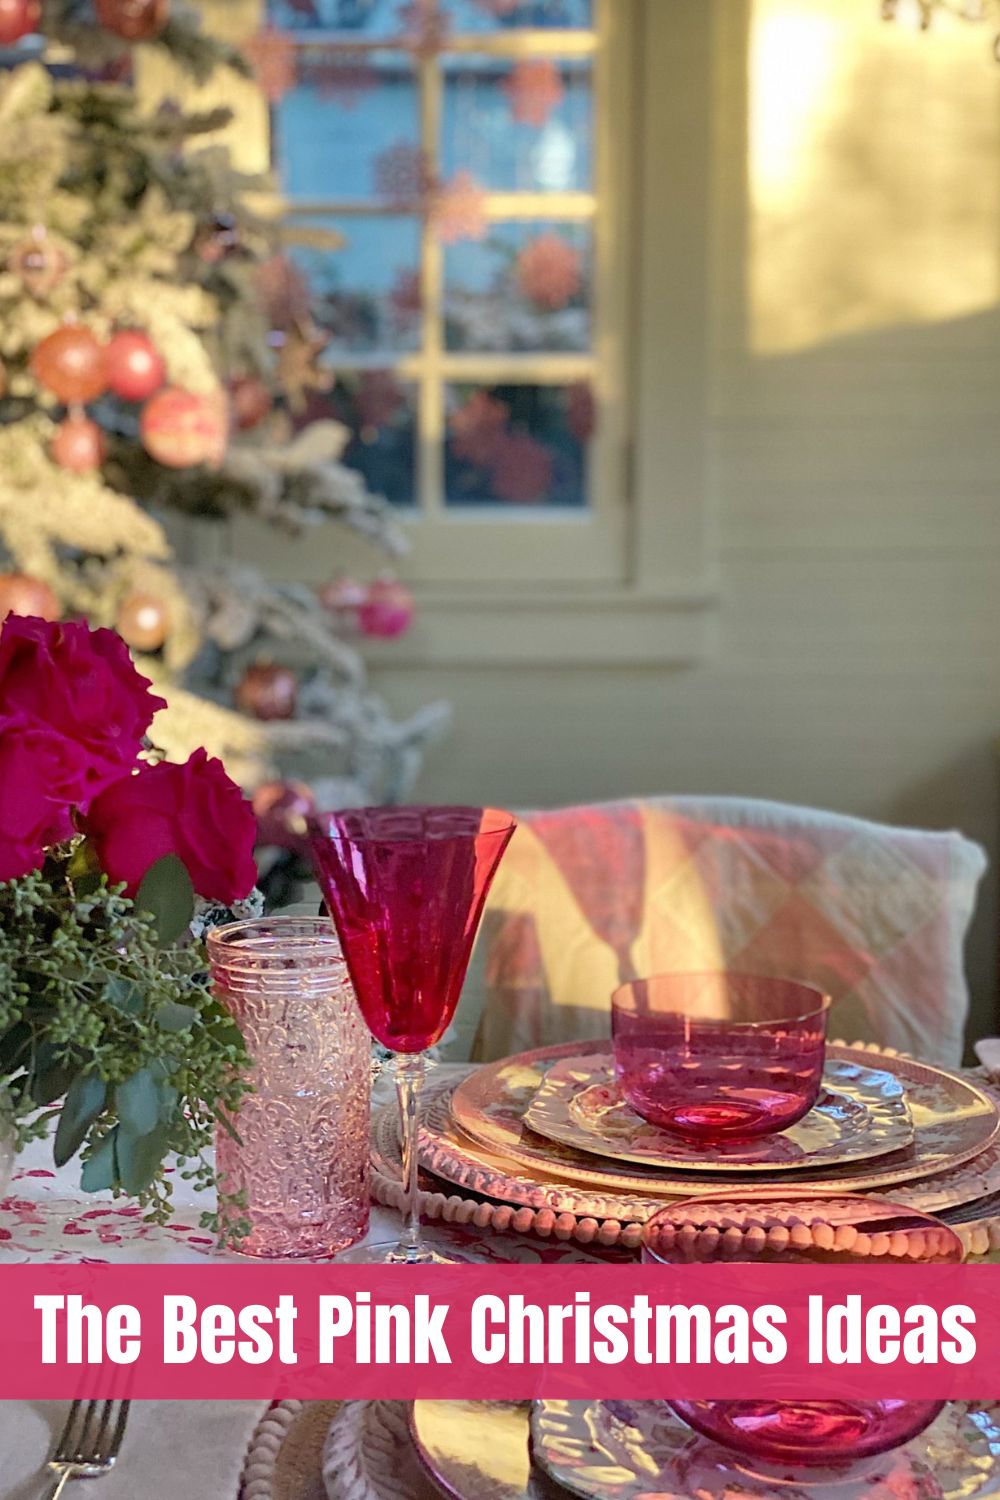 Looking for a non-traditional Christmas color? Decorating for a Pink Christmas was one of my favorite Christmas decor ideas!